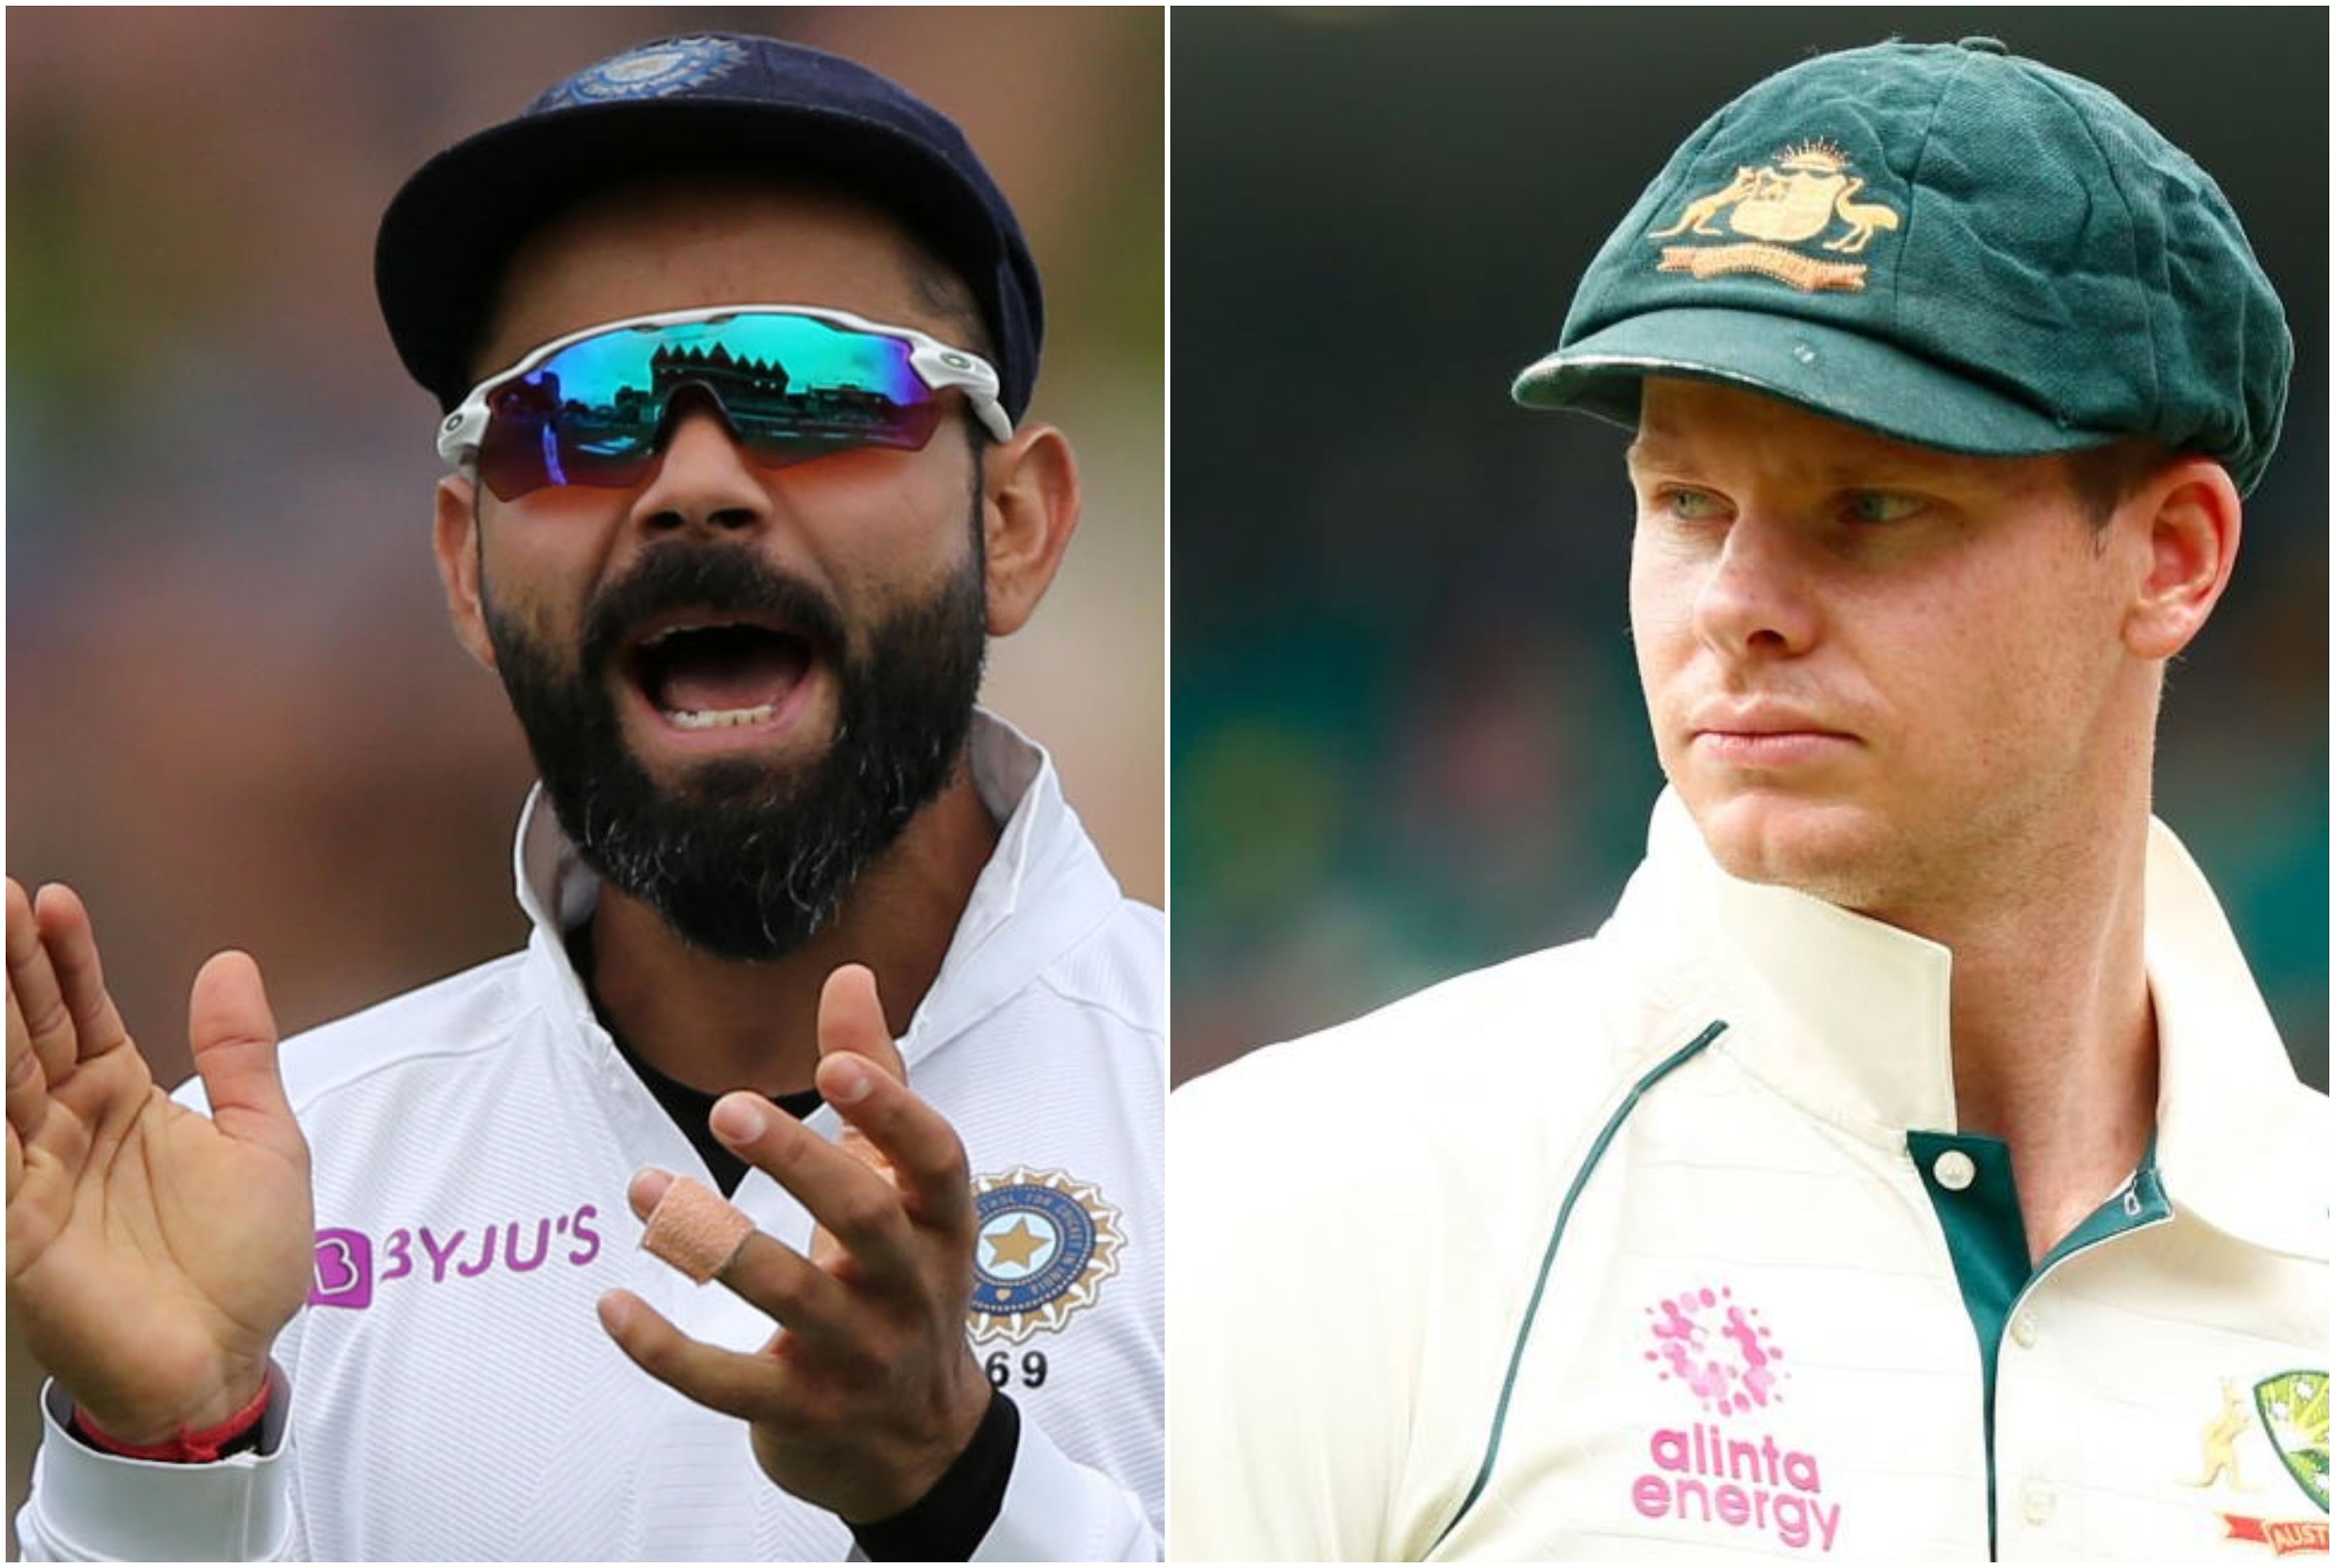 "In tennis terms, I'd say he's (Kohli) more like a (Roger) Federer whereas Smith is like a (Rafael) Nadal. Smith is mentally very strong and figures out a way of scoring runs - he doesn't look natural, but he ends up writing records and doing amazing things at the crease," said AB De Villiers.